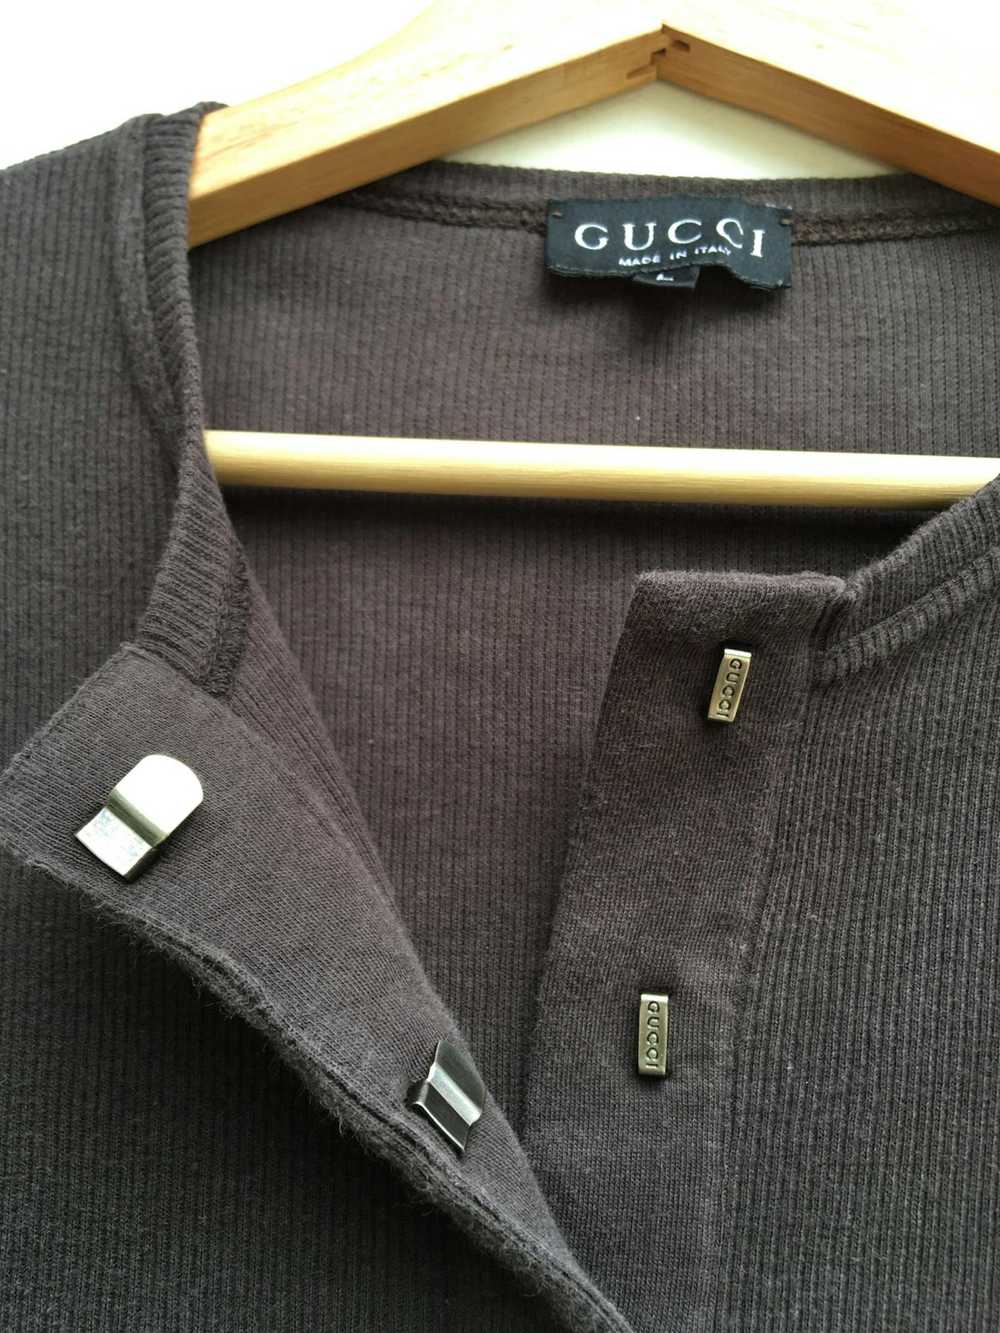 Gucci Vintage 90s Gucci Longsleeve Button Up Shirt - image 7